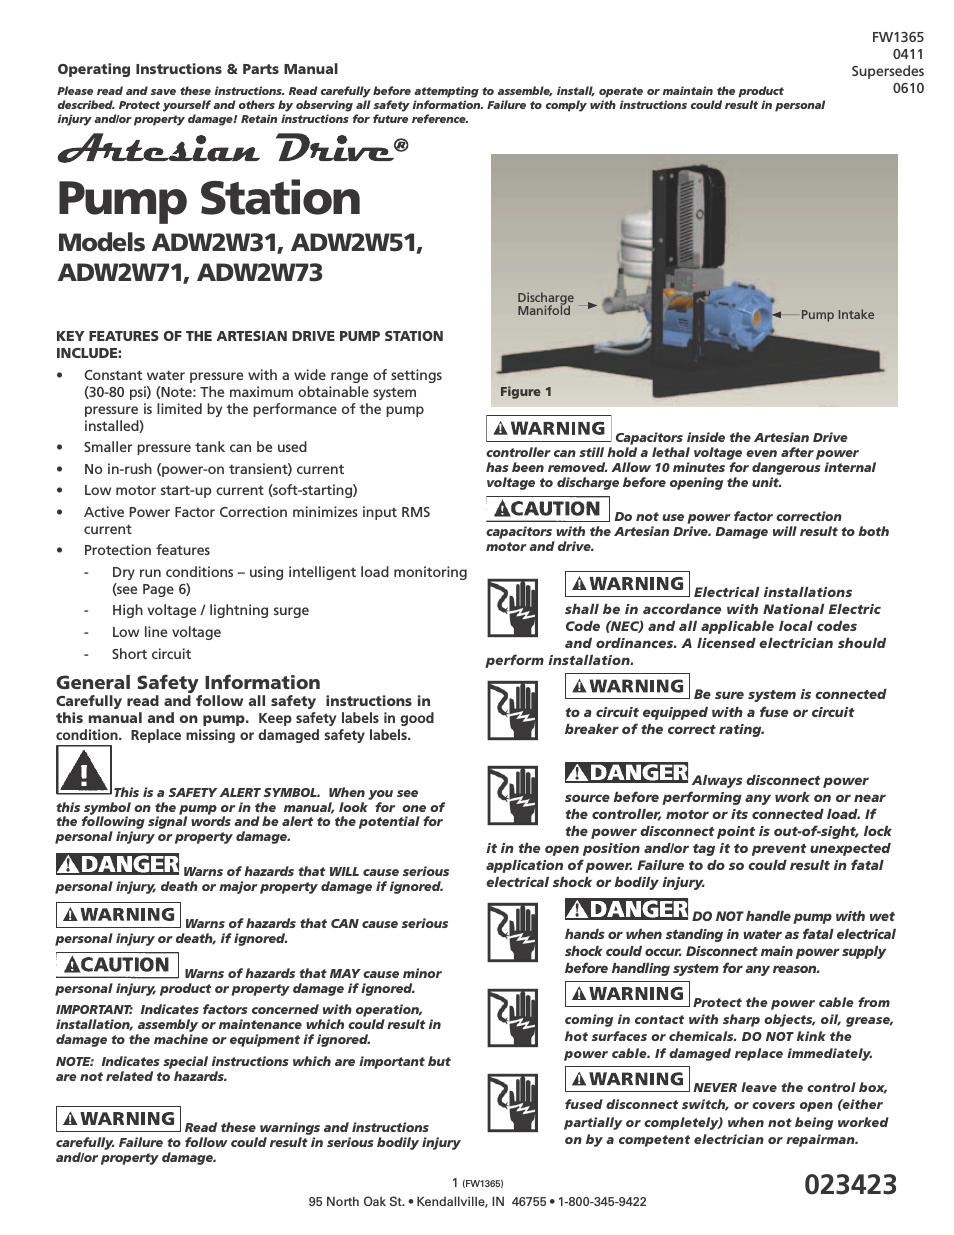 Constant Pressure Pumping Stations - ADW2W73